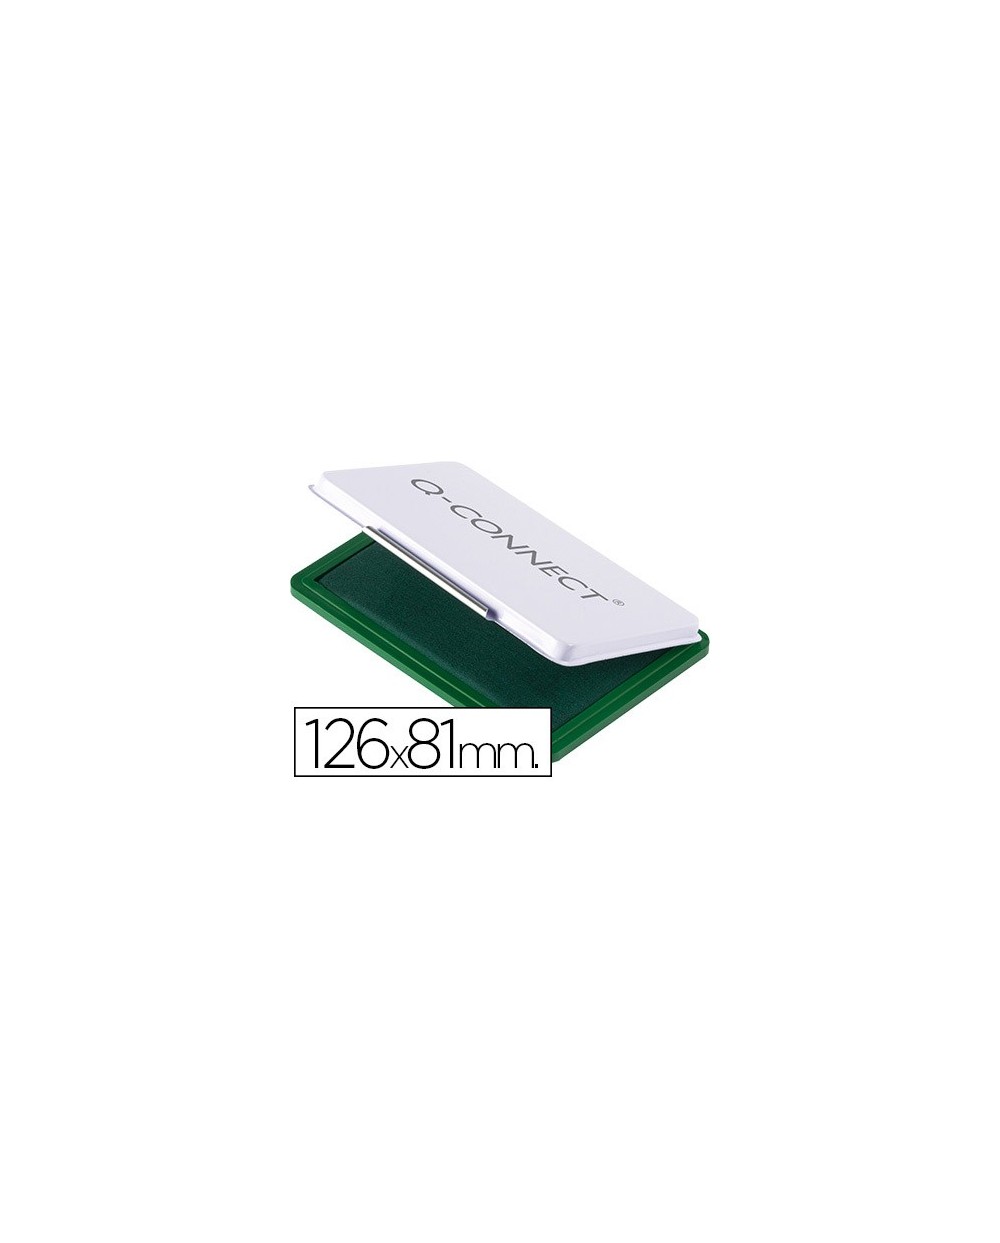 Tampon q connect n1 126x81 mm verde